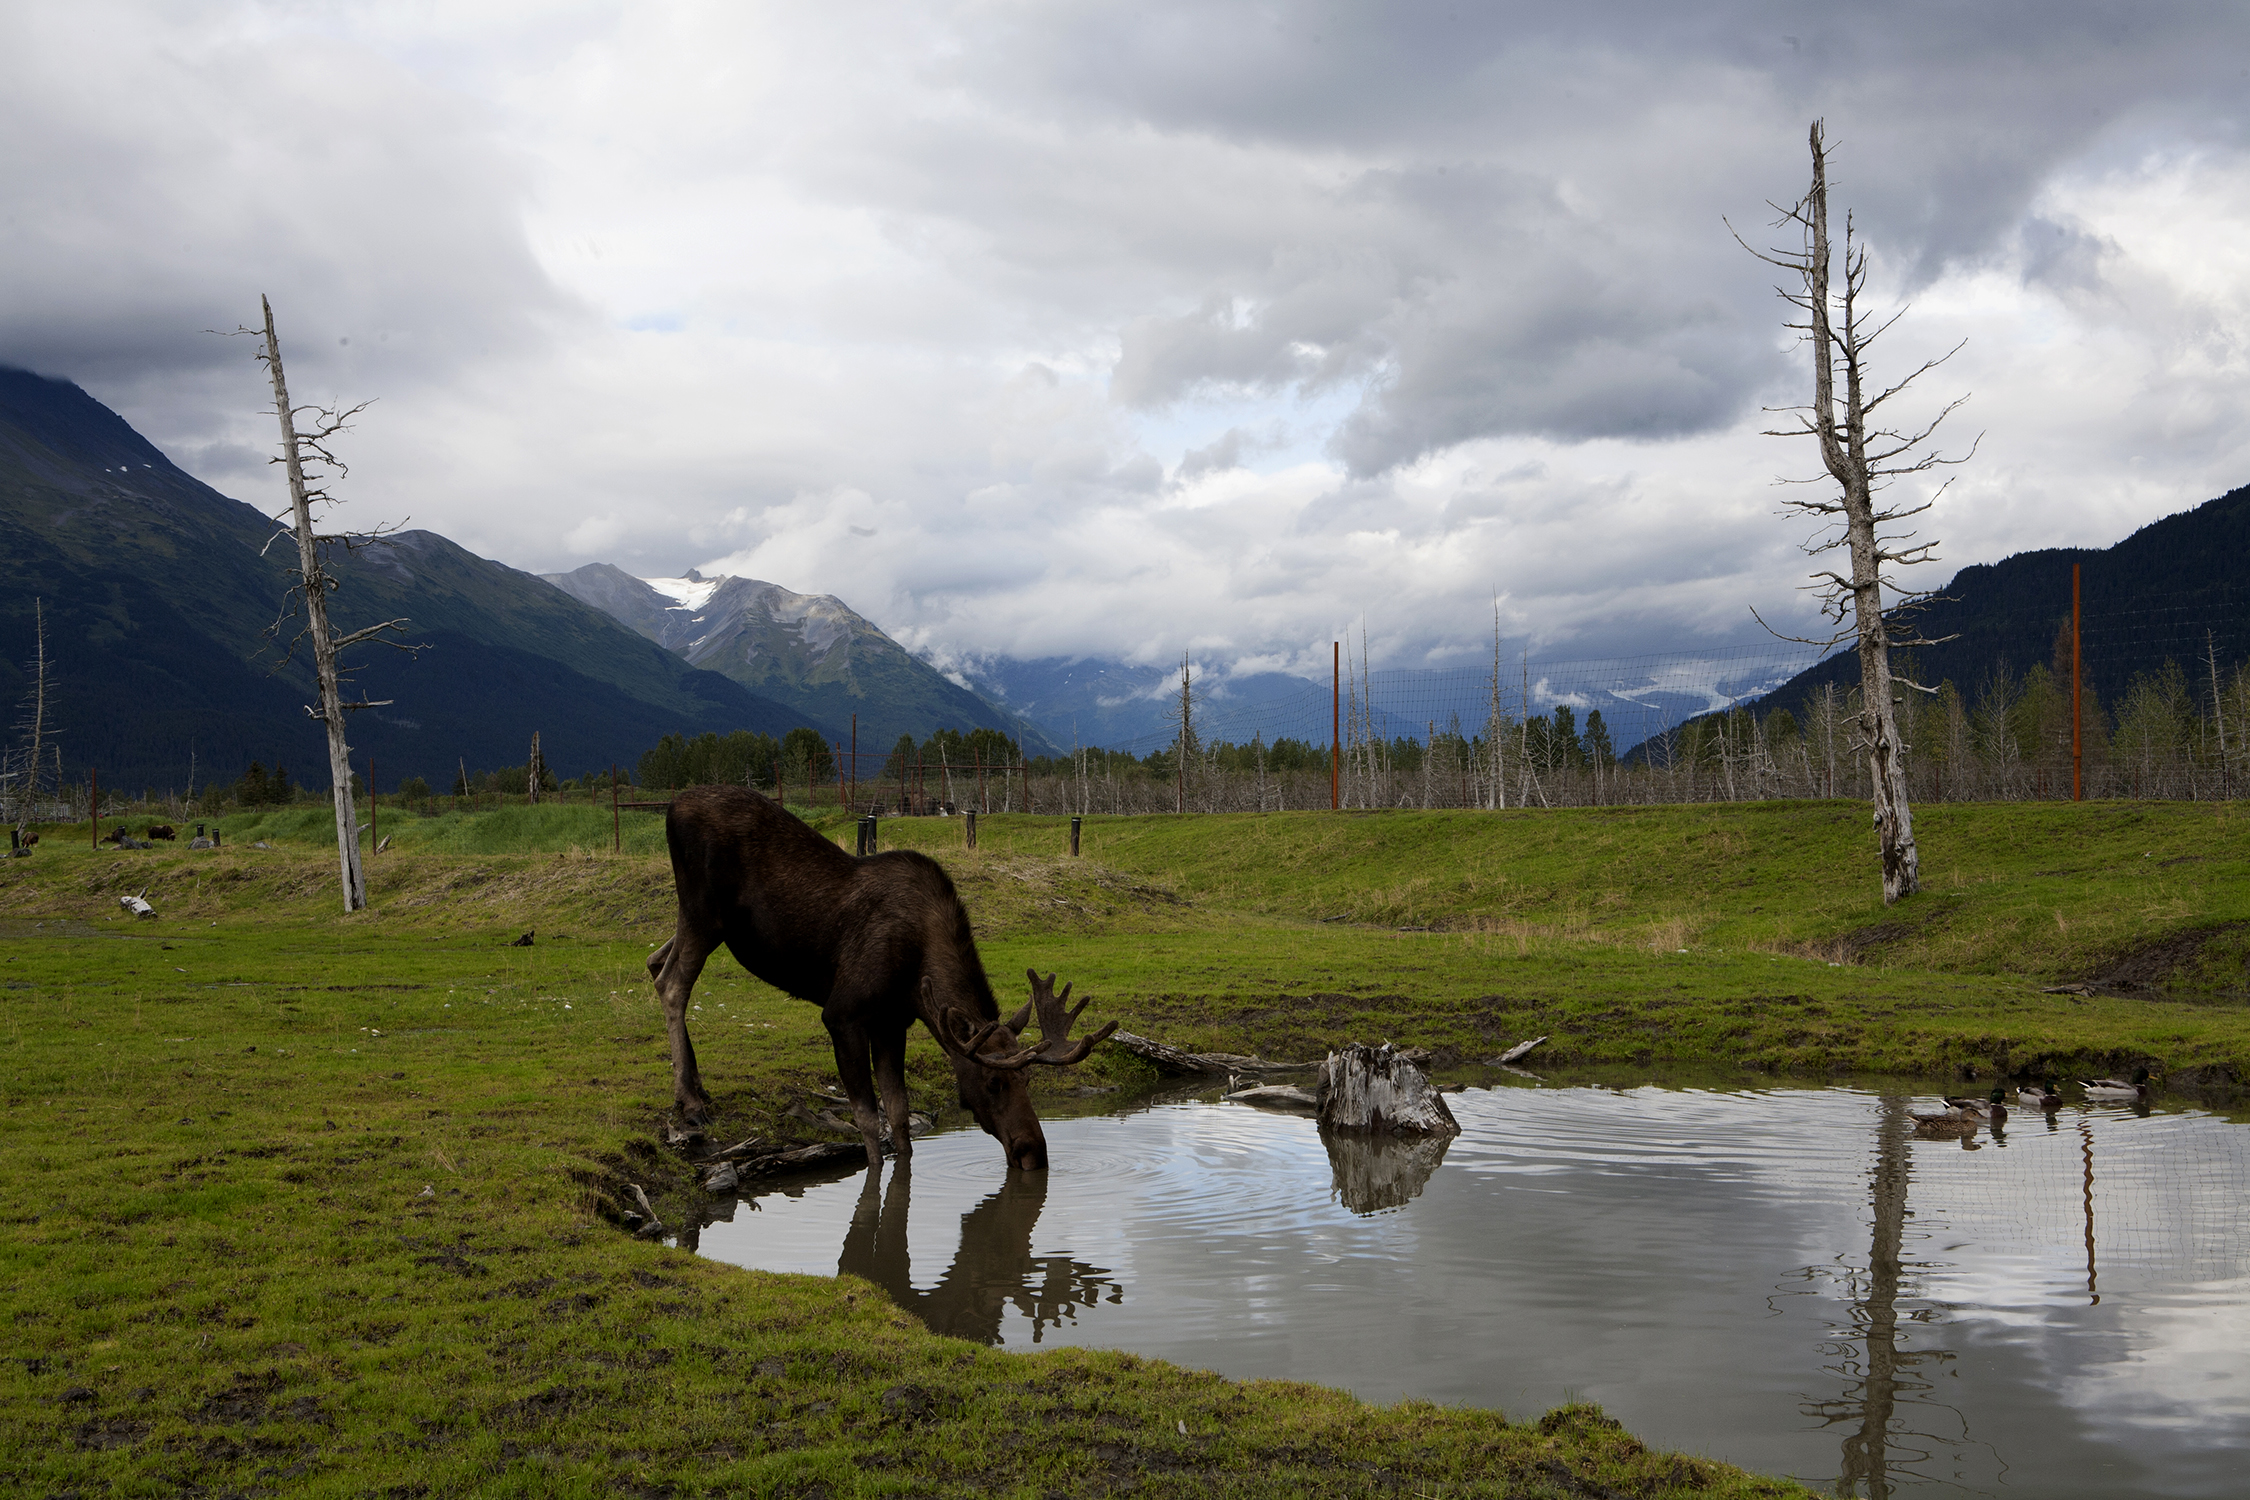  Set on the shores of Turnagain Arm,&nbsp; the 200-acre Alaska Conservation Center in Girdwood, Alaska provides refuge for orphaned, injured and animals like this moose that can’t survive in the wild. © Photo by Gail Fisher 